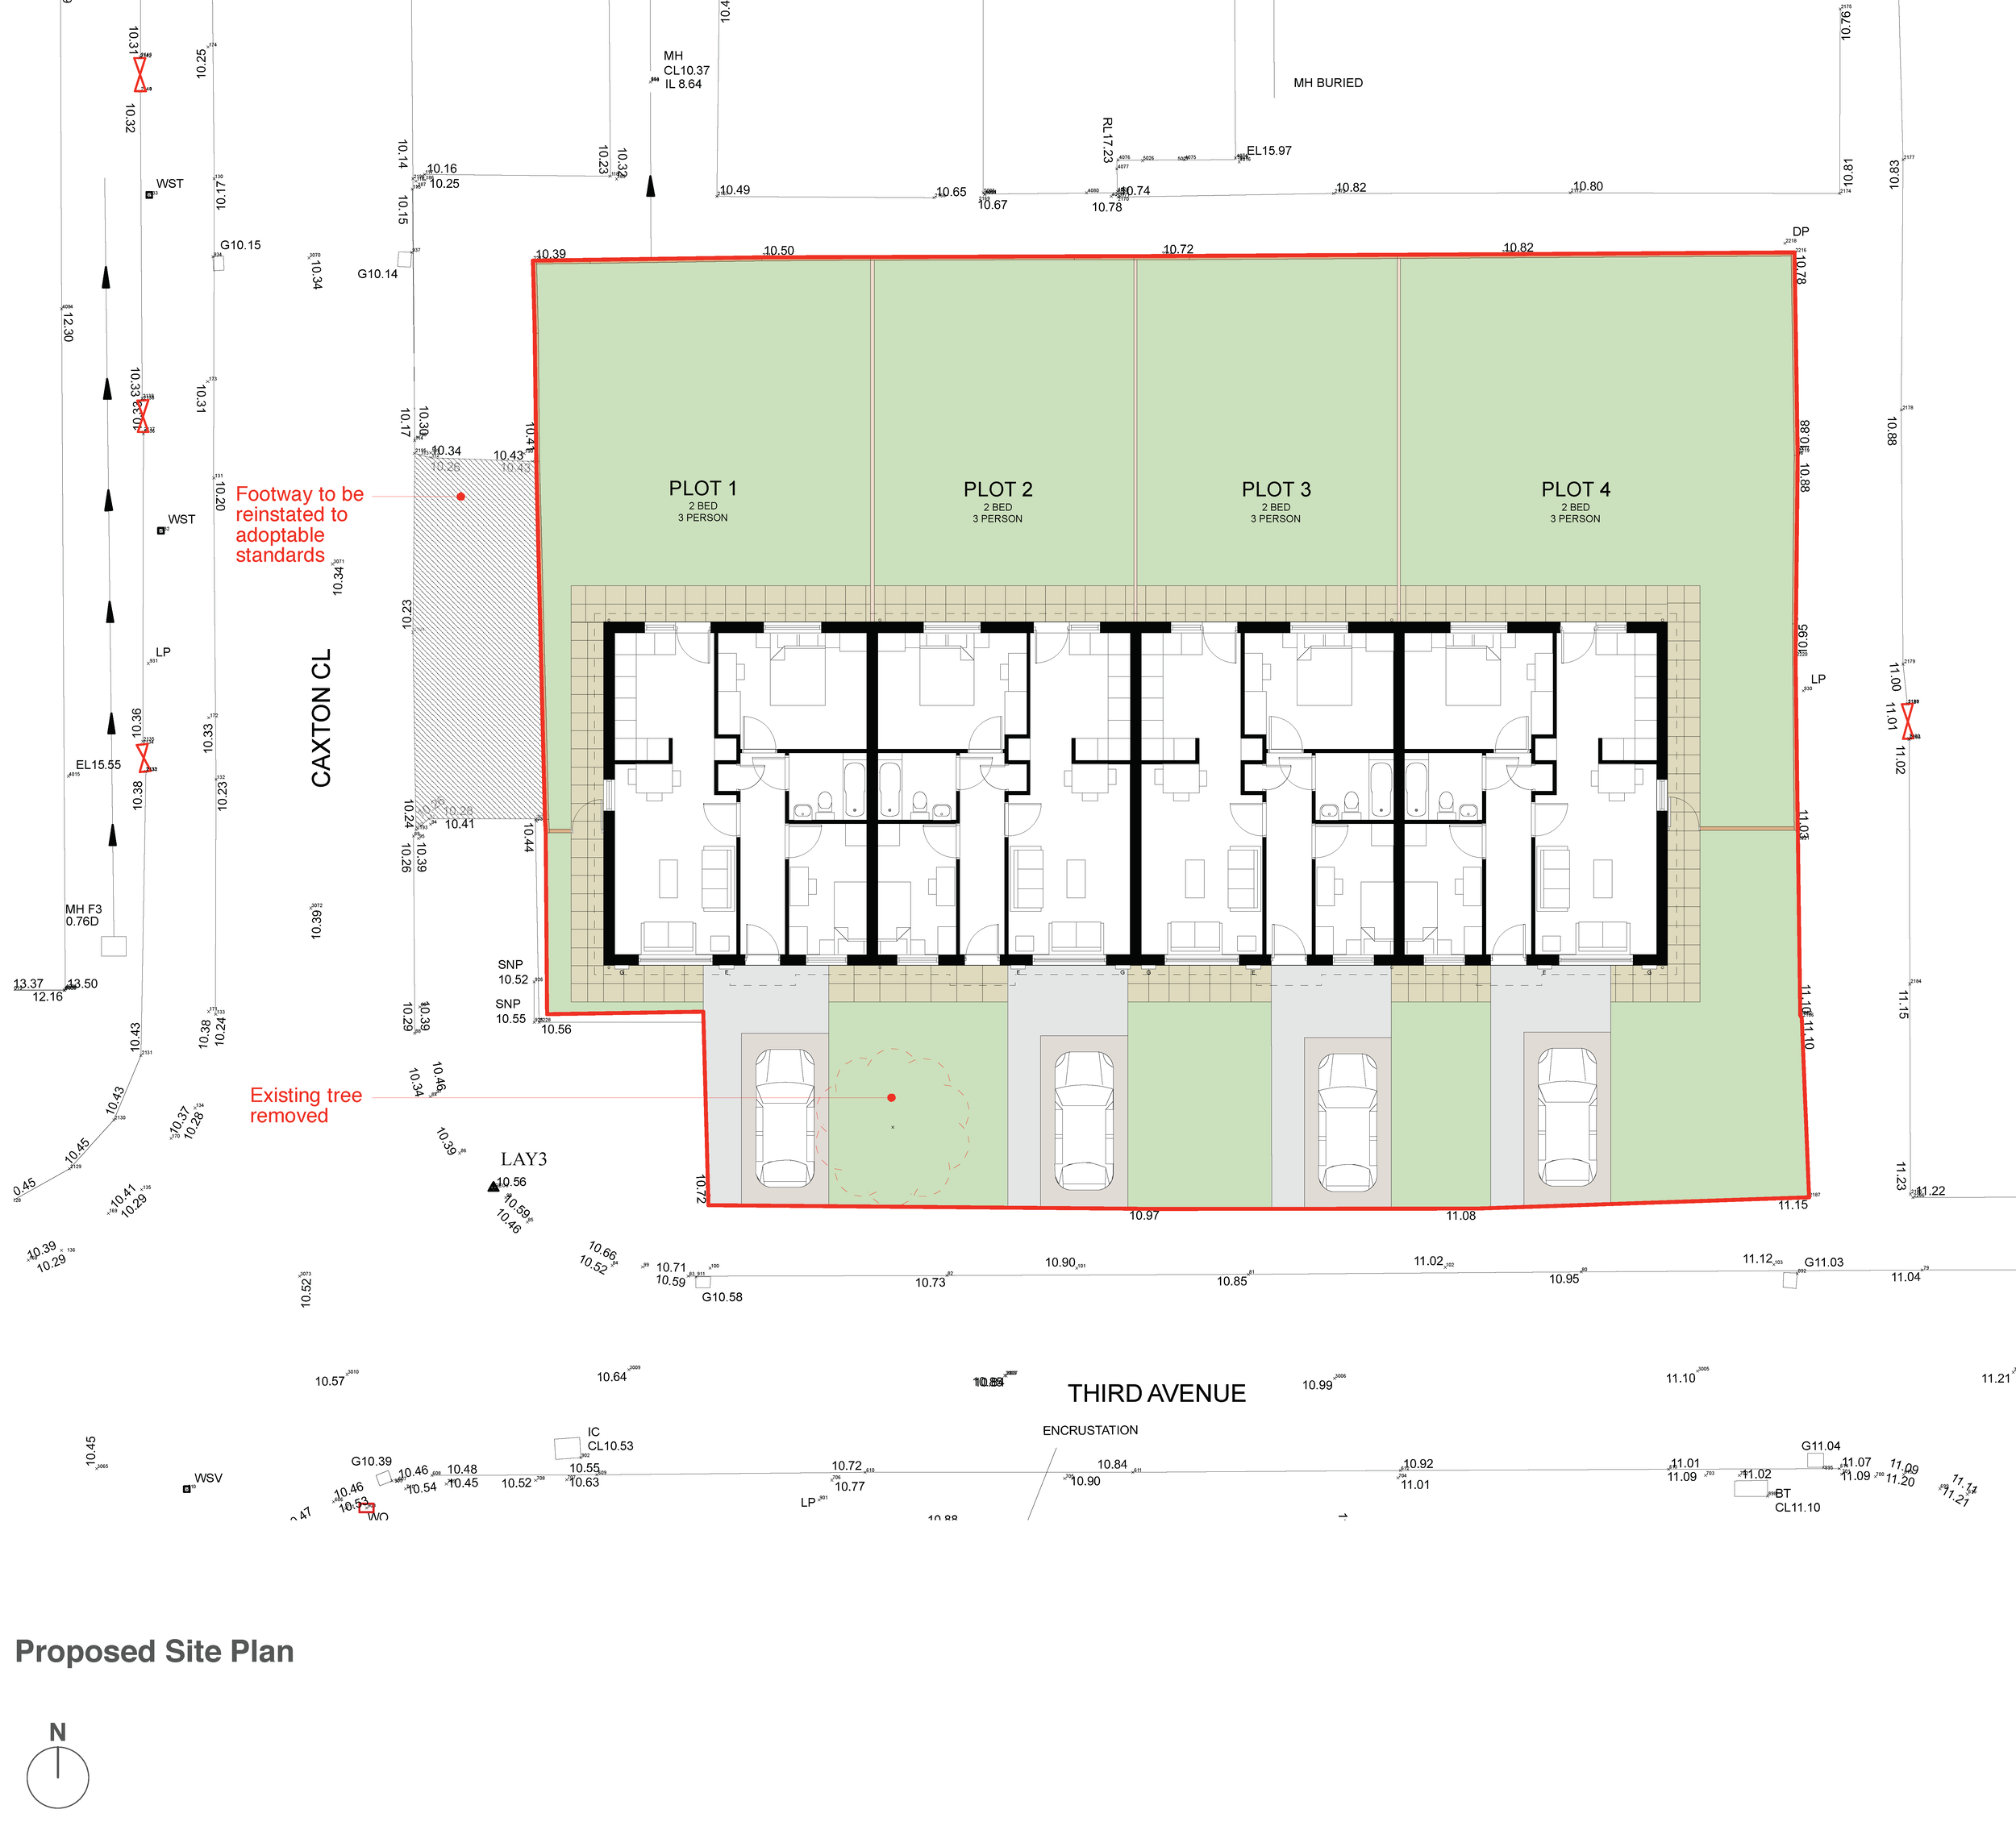 P282.3_203B Proposed Site Plan-Caxton Close.png